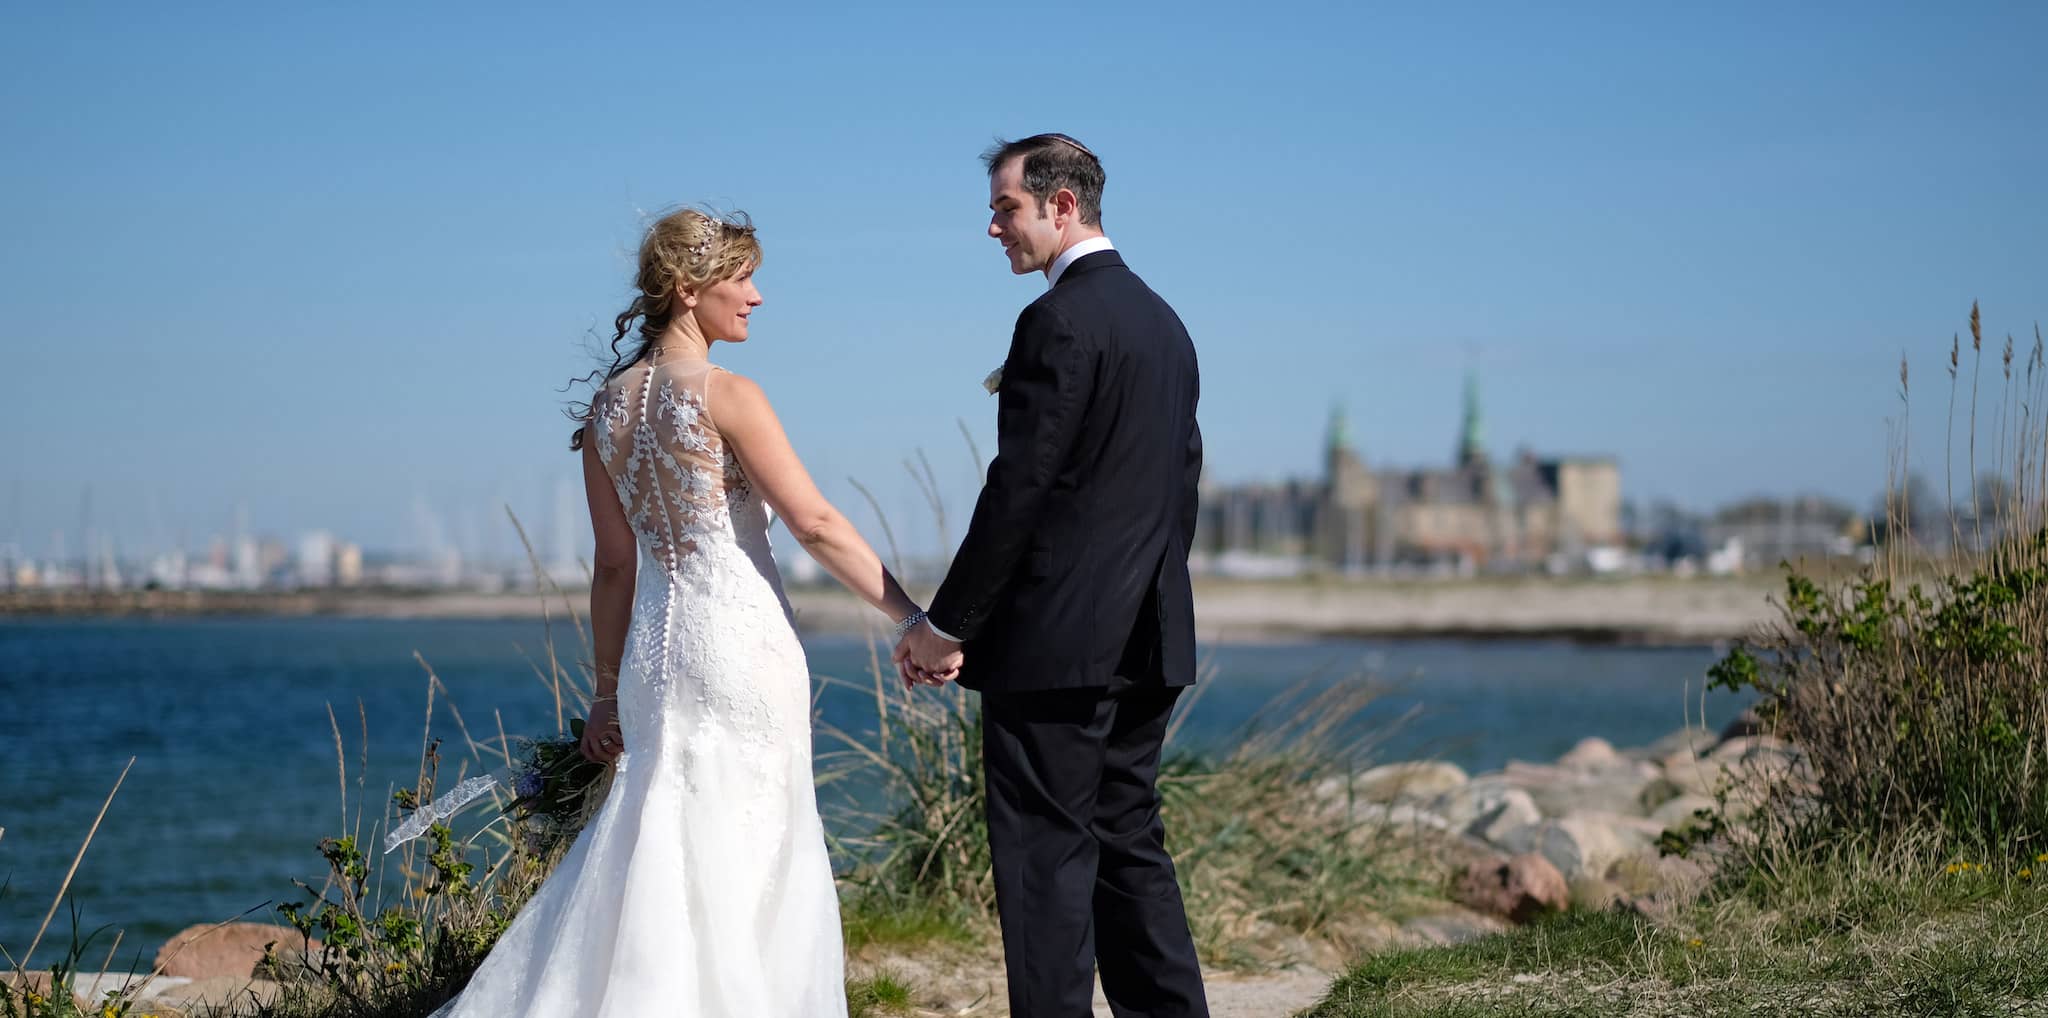 Top 3 Reasons To Have A Destination Wedding Over Traditional Wedding